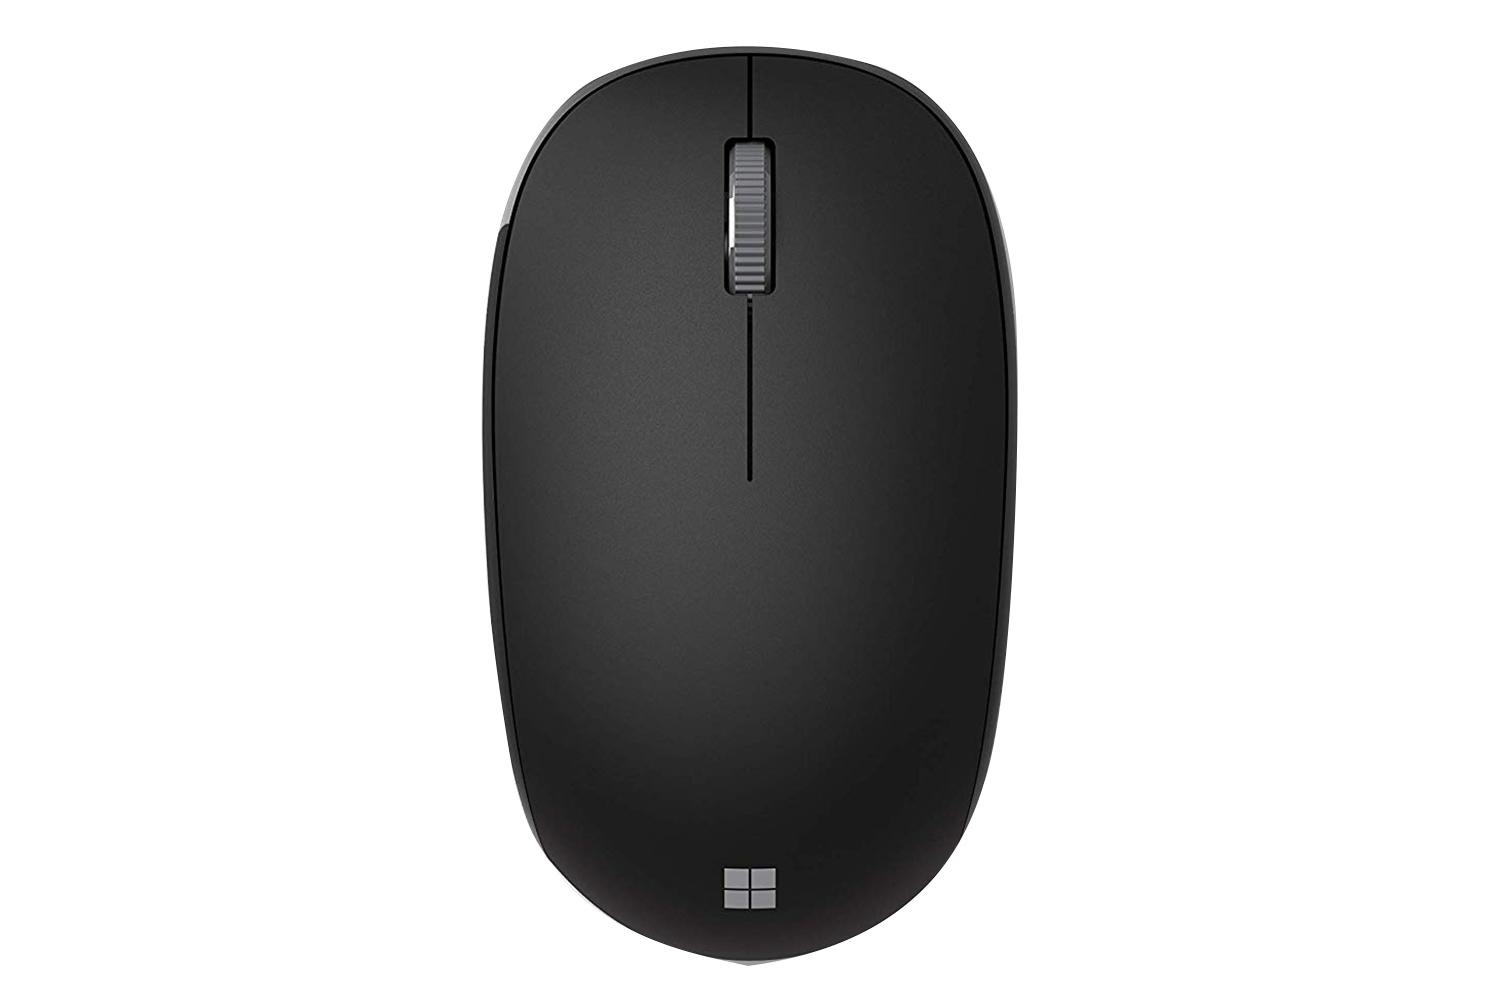 driver for microsoft bluetooth mouse